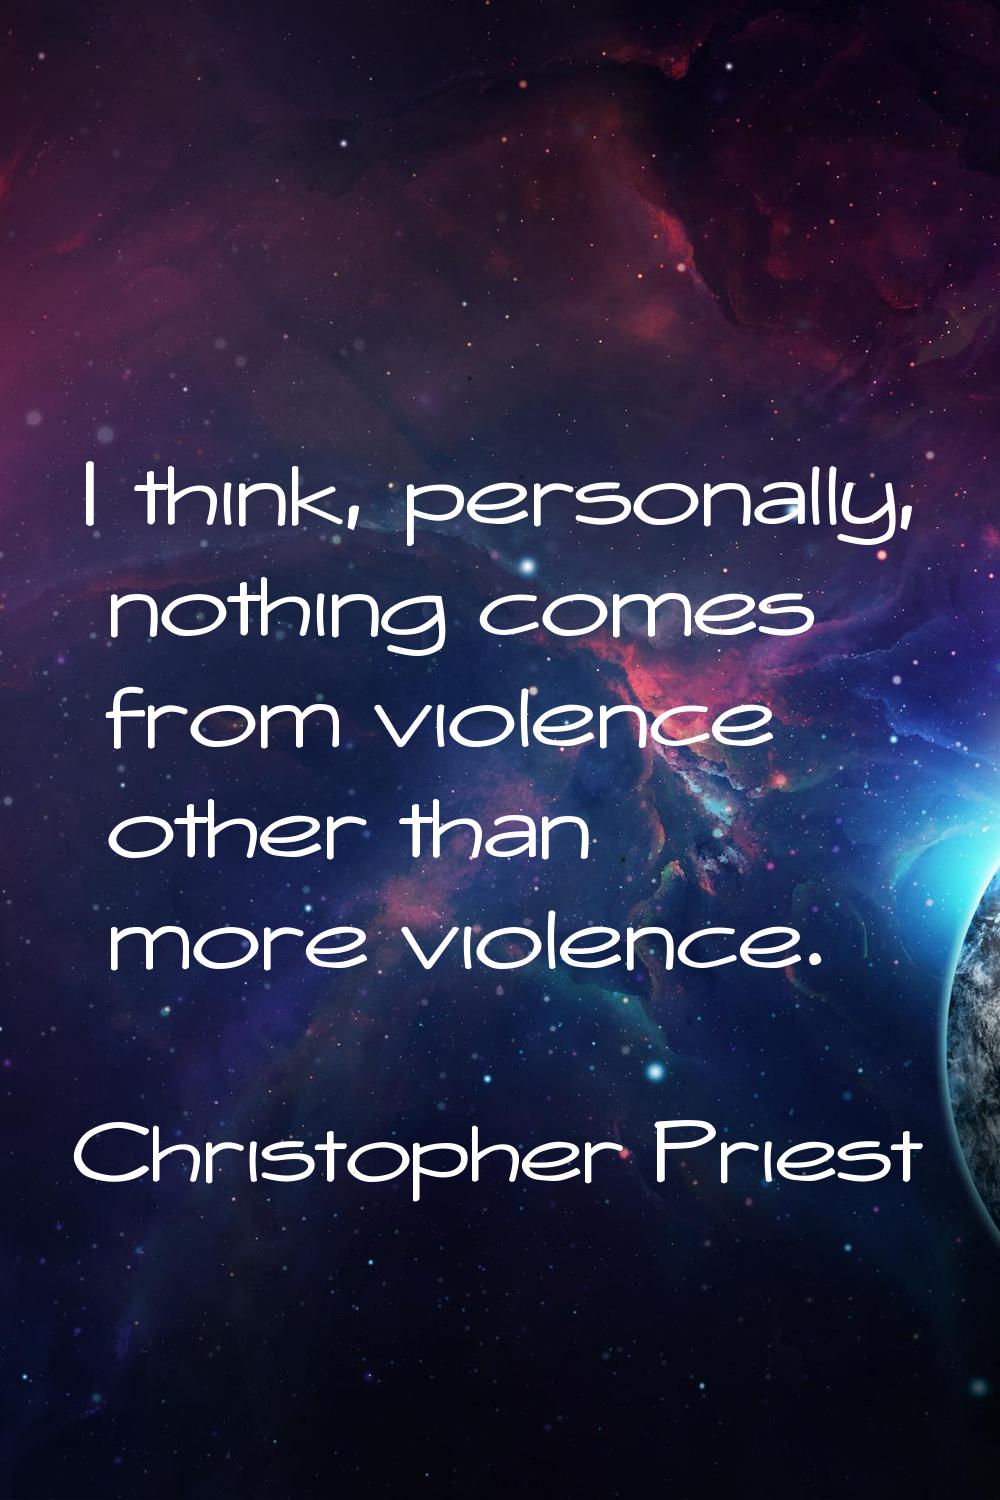 I think, personally, nothing comes from violence other than more violence.